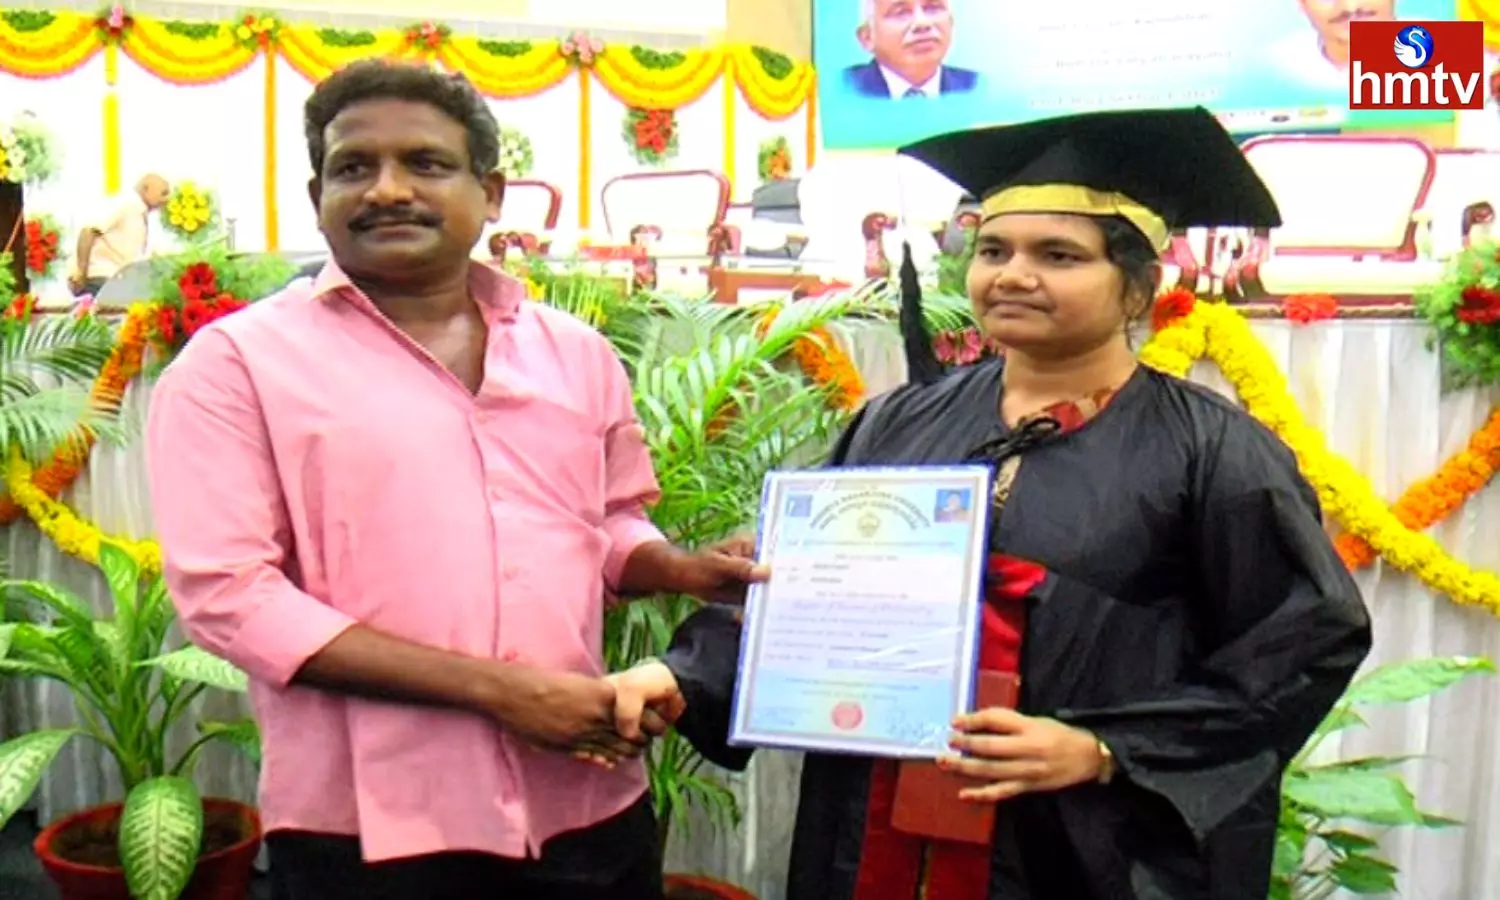 Auto Driver Wife Who Completed Her PhD With Persistence